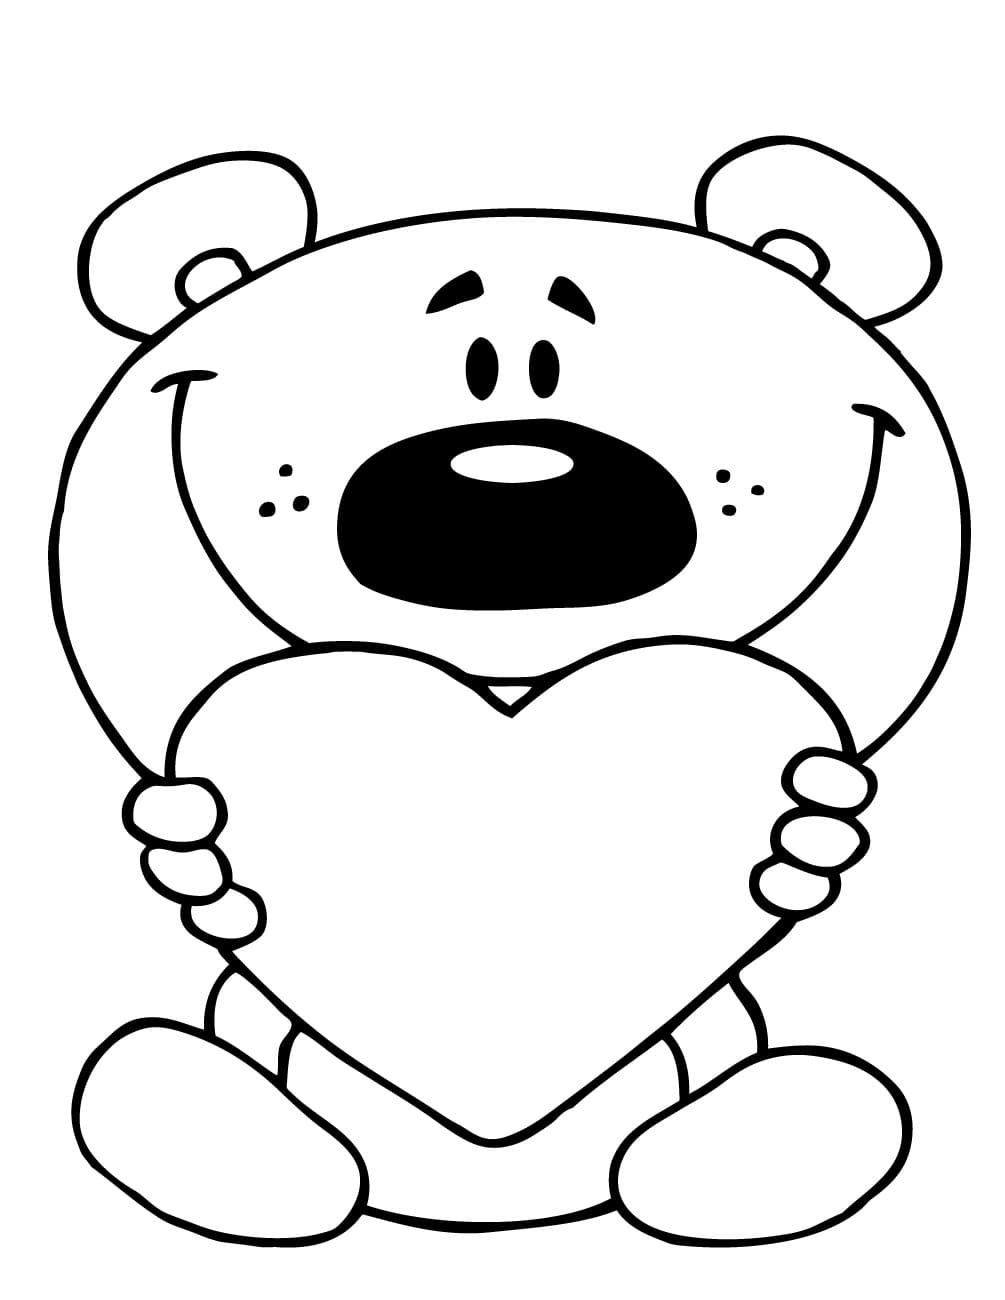 Coloring page Valentine's Day Valentine's Day